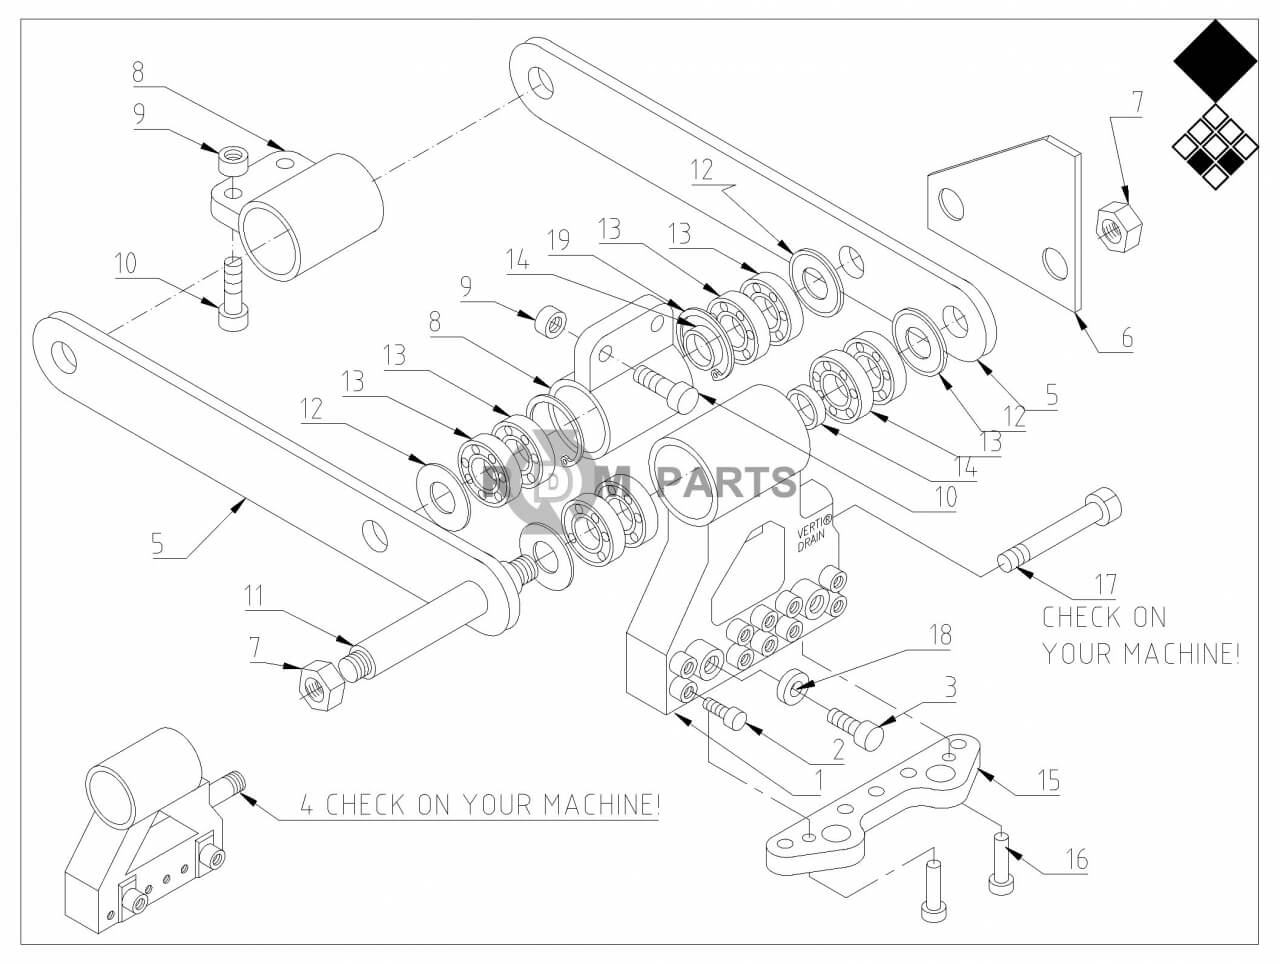 Replacement parts for VD7521 Penhouder